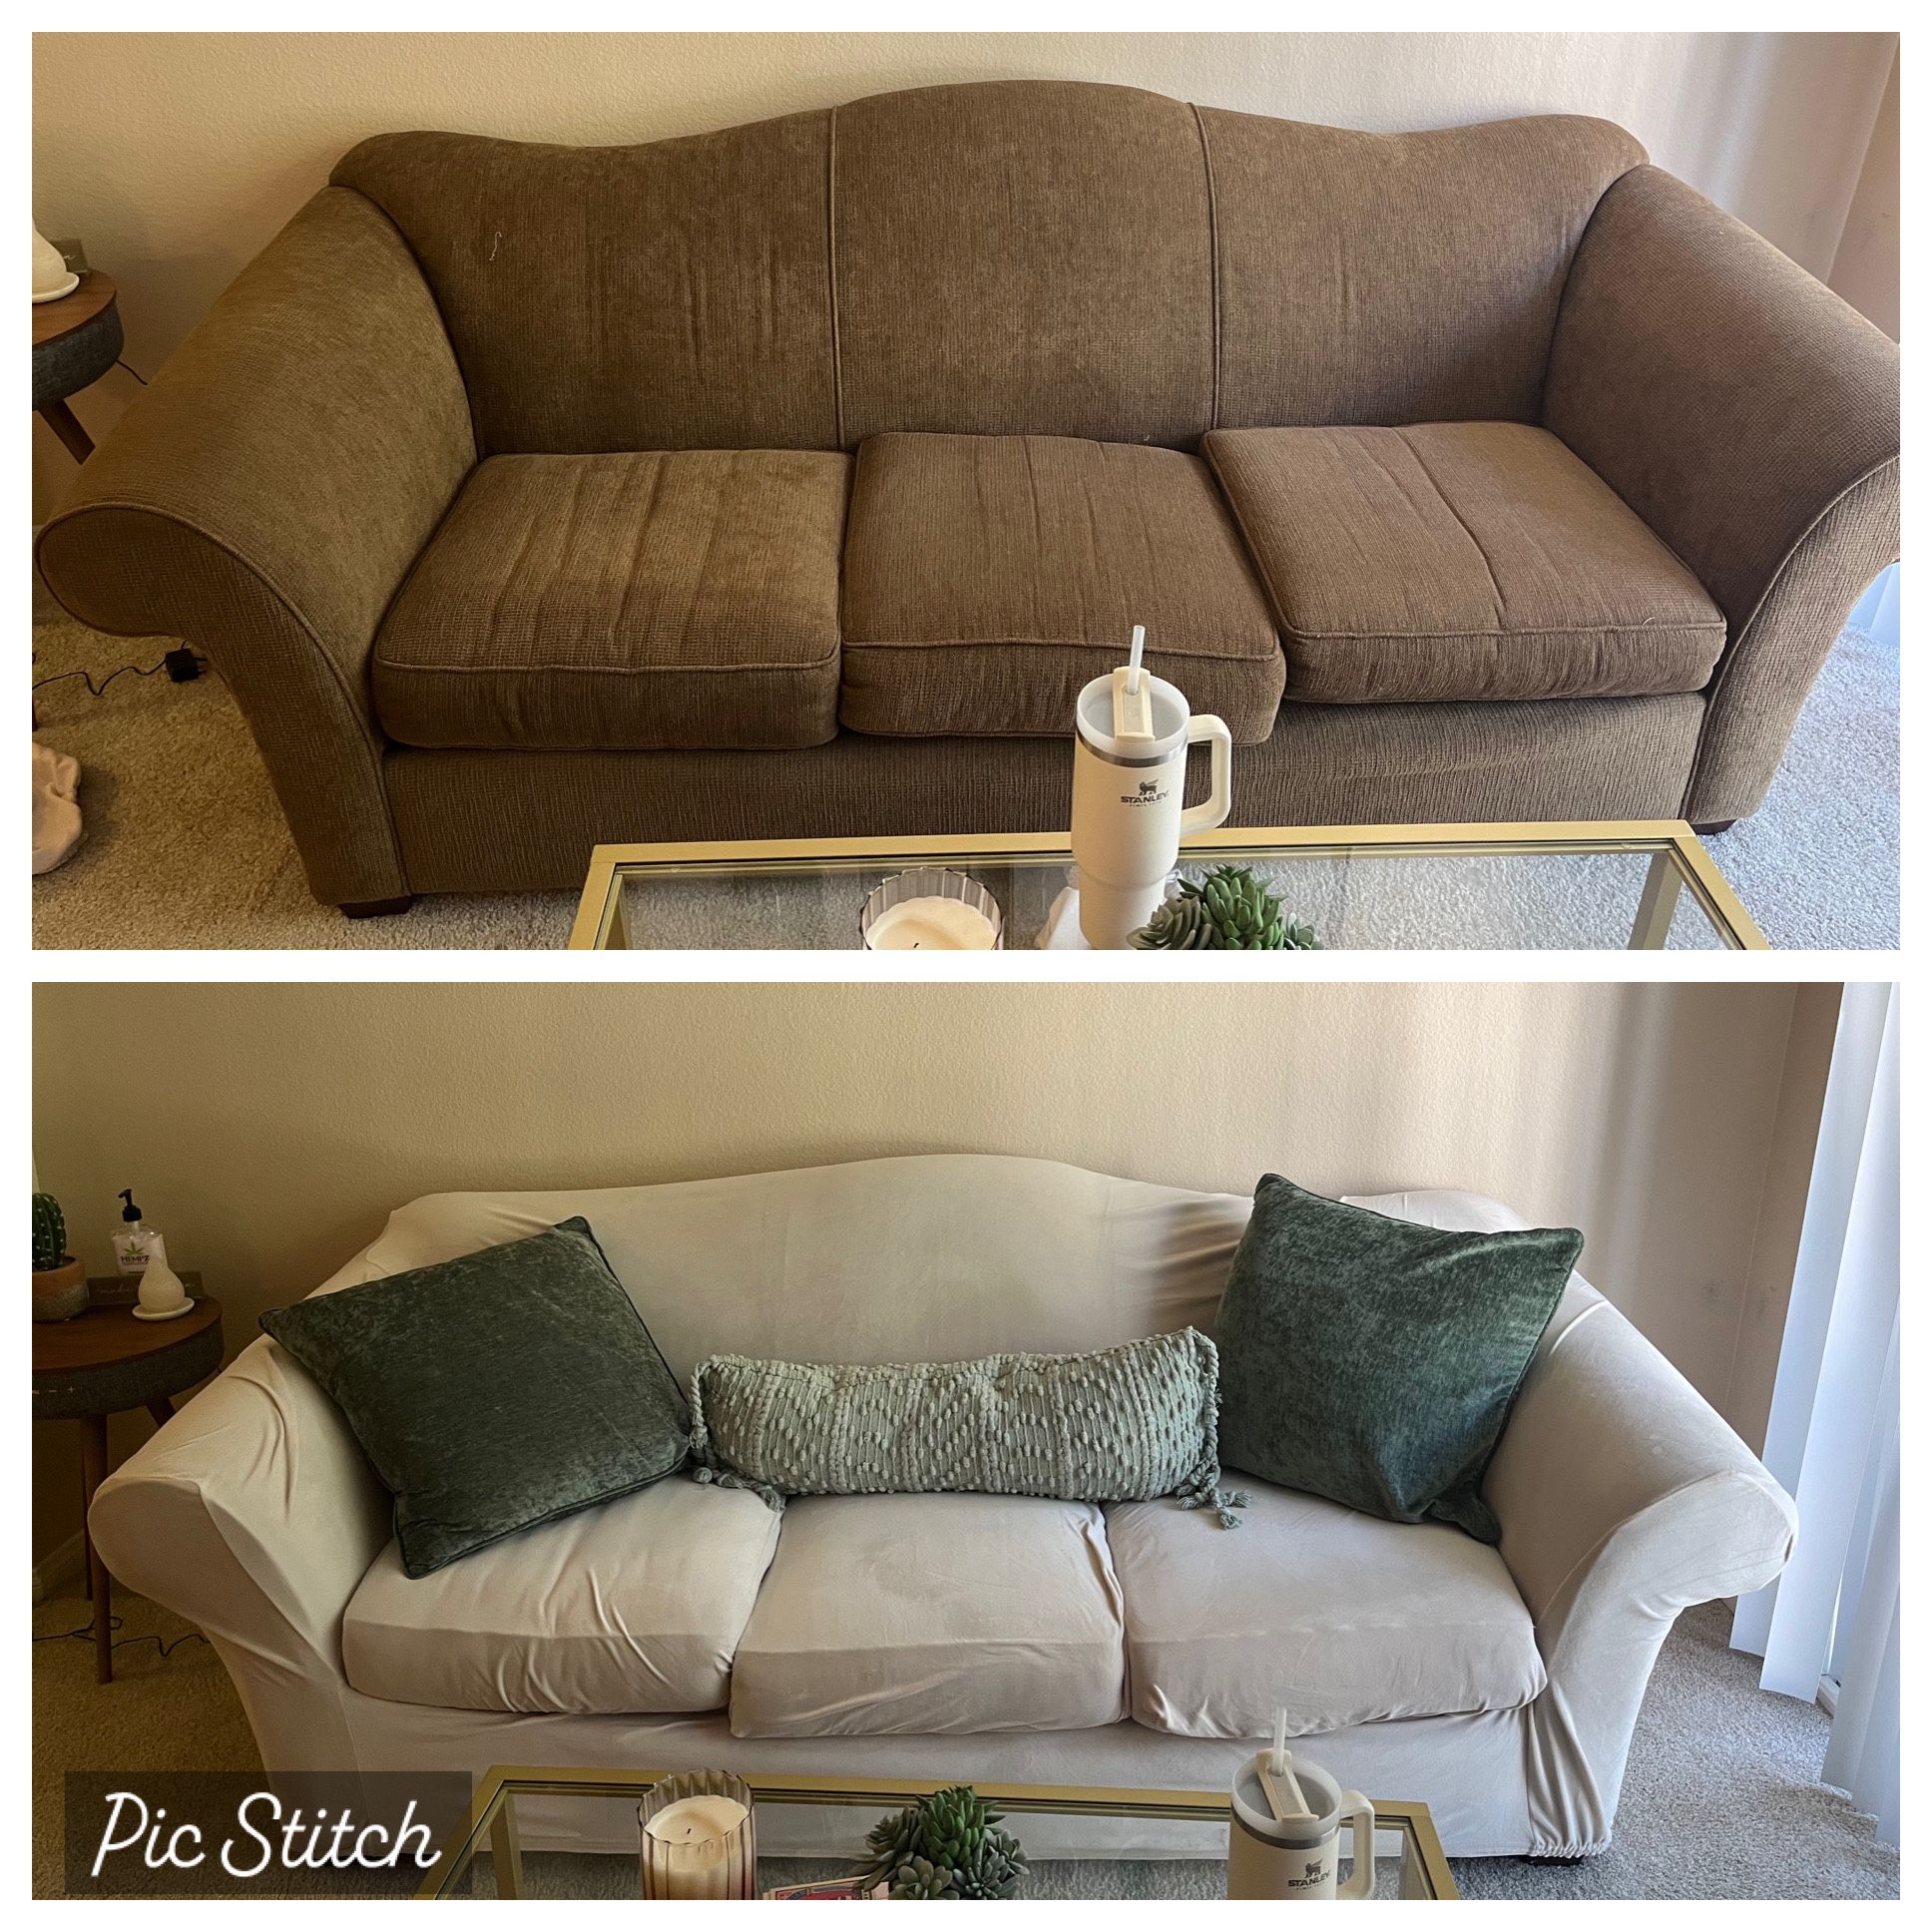 FREE - Very Comfortable Couch!